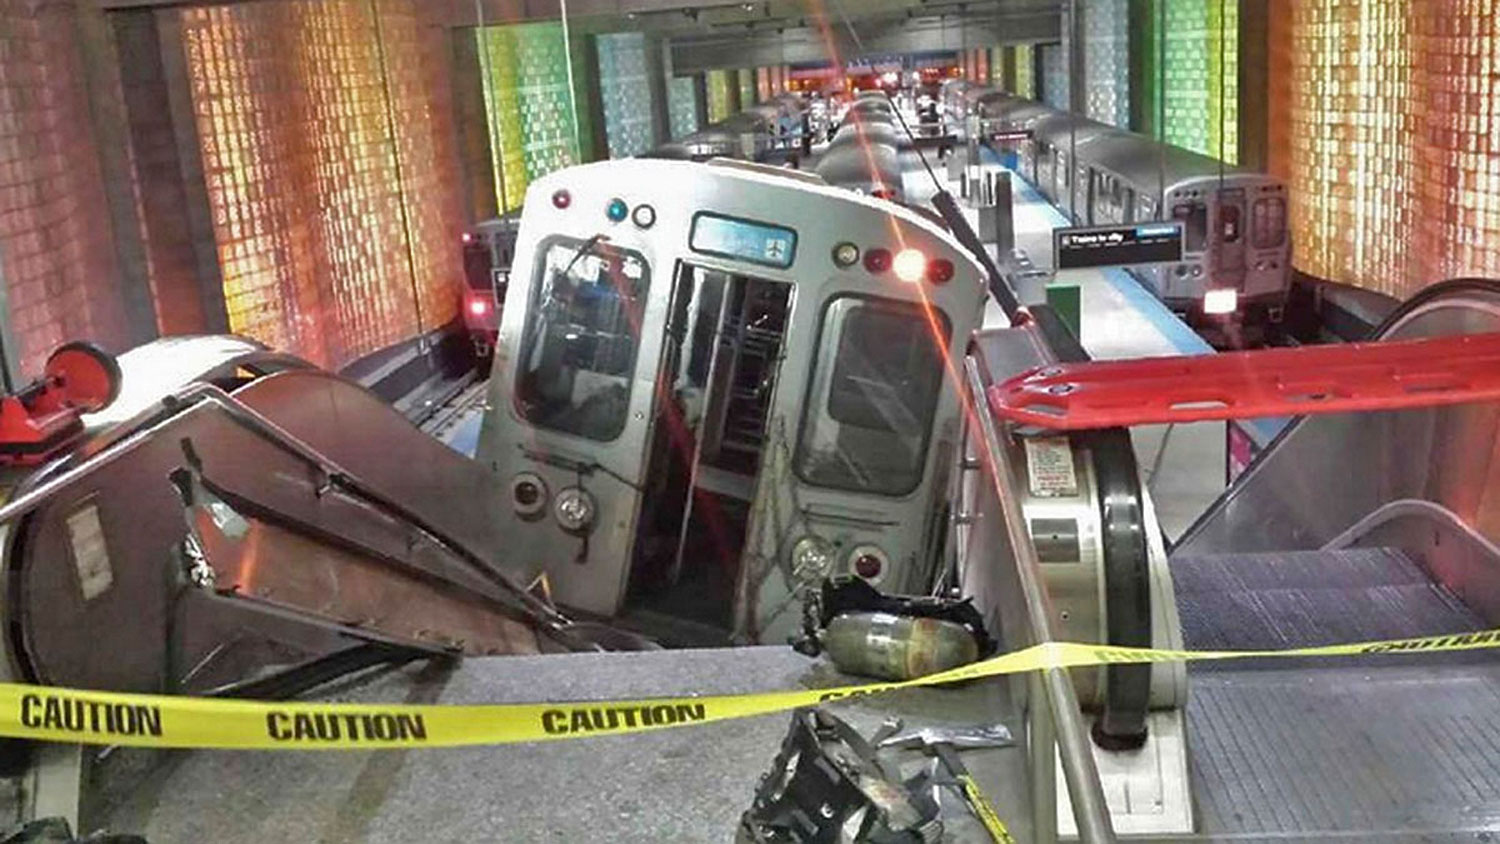 A derailed commuter train is shown resting on an escalator at O'Hare international airport in Chicago March 24, 2014. (NBC Chicago/Reuters)